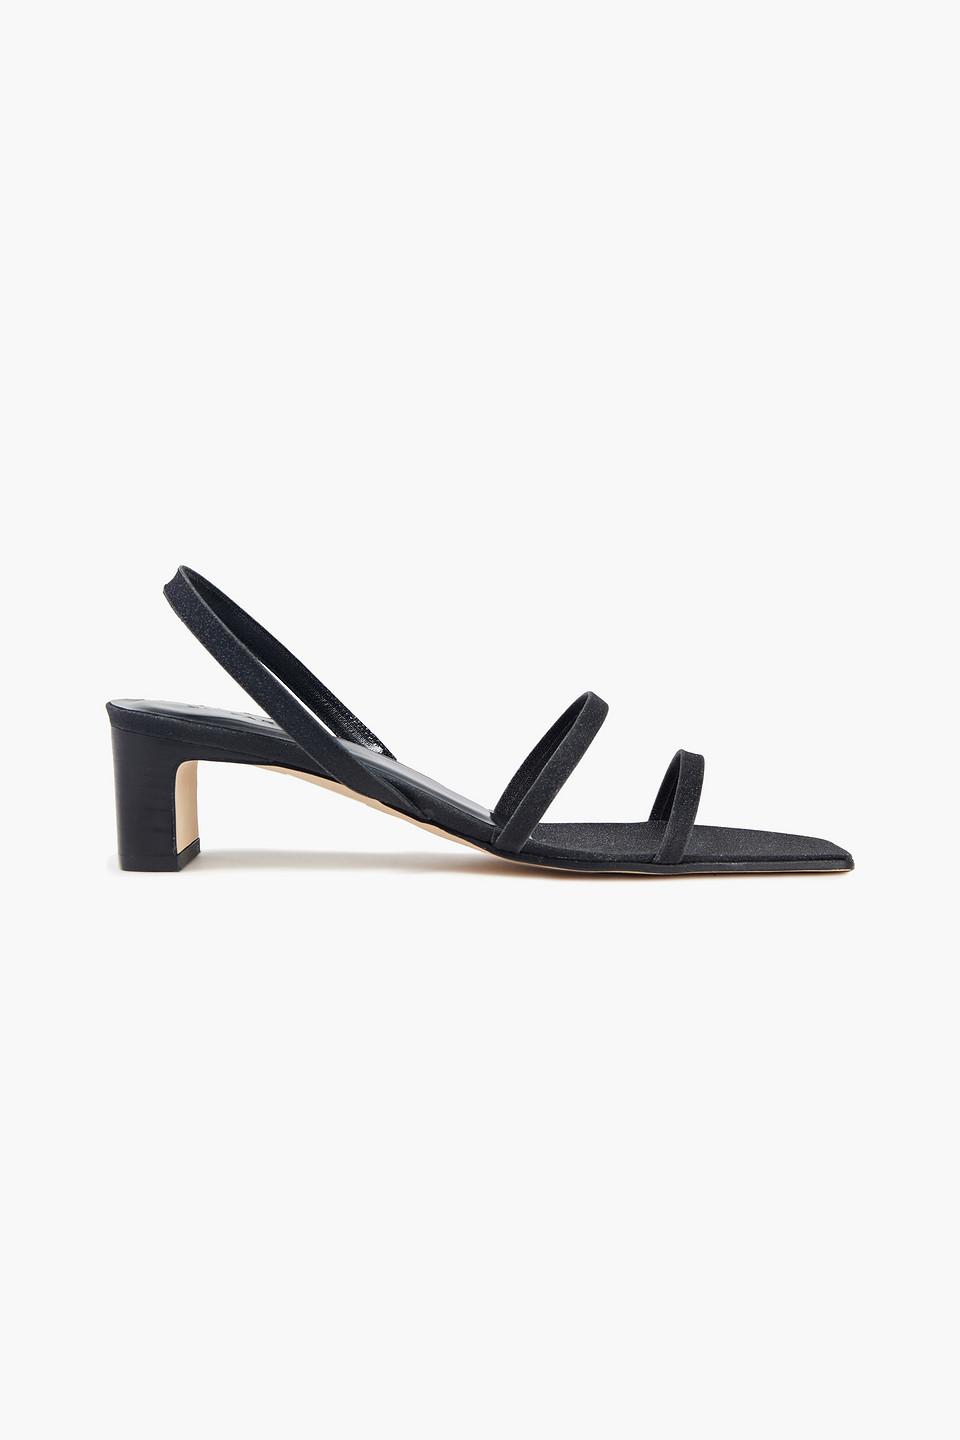 BY FAR Renata Glittered Leather Slingback Sandals in Black | Lyst